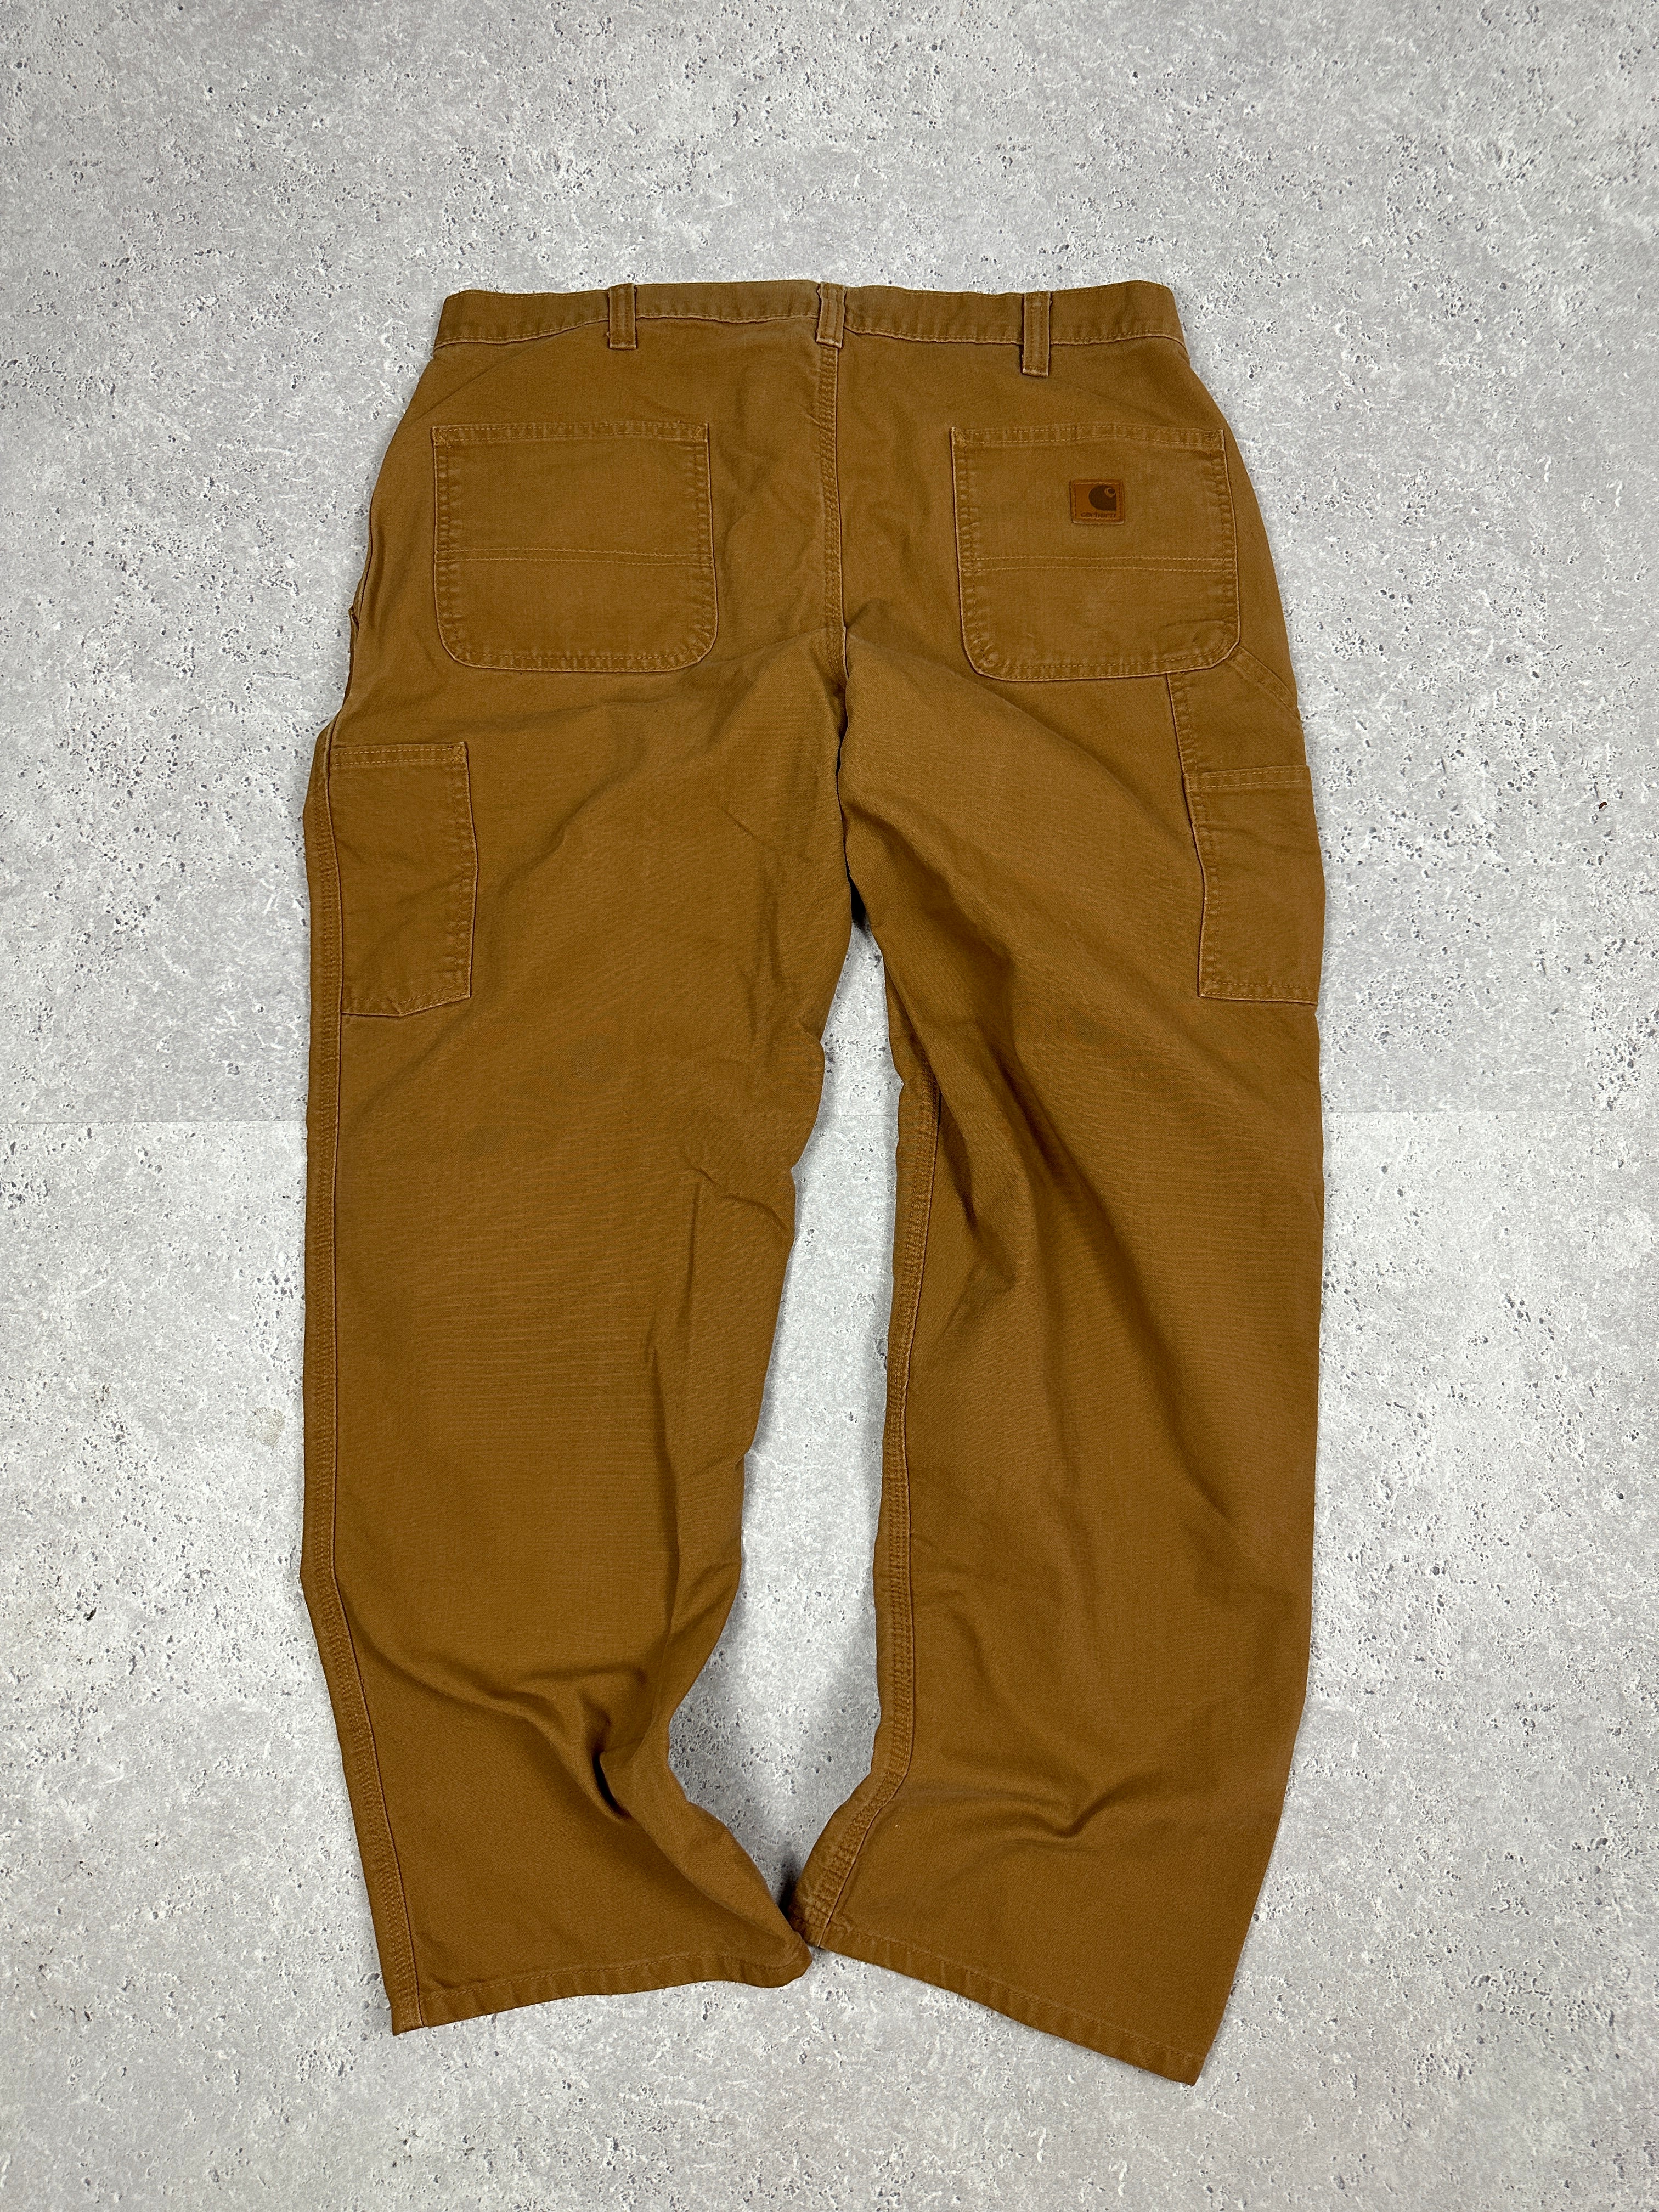 Vintage Carhartt Dungaree Fit Jeans Brown 38x32